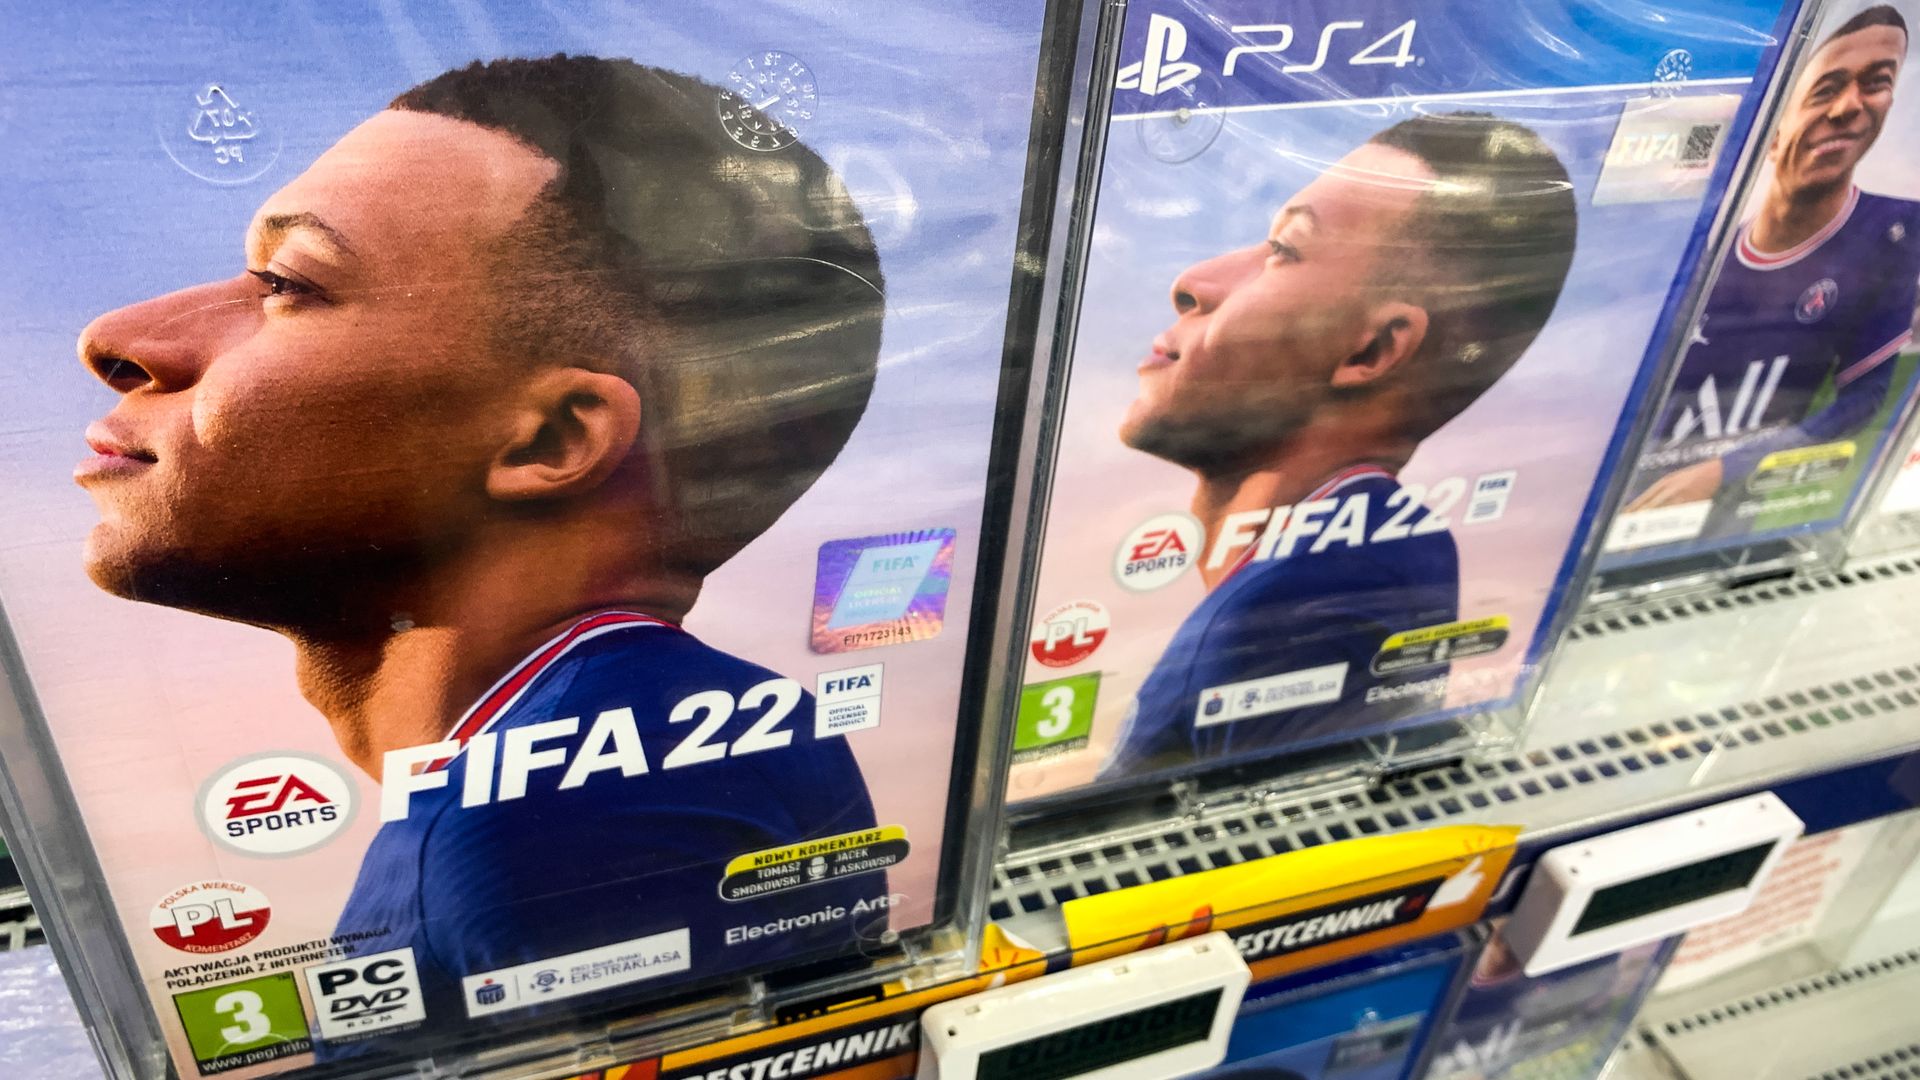 FIFA 22 game boxes